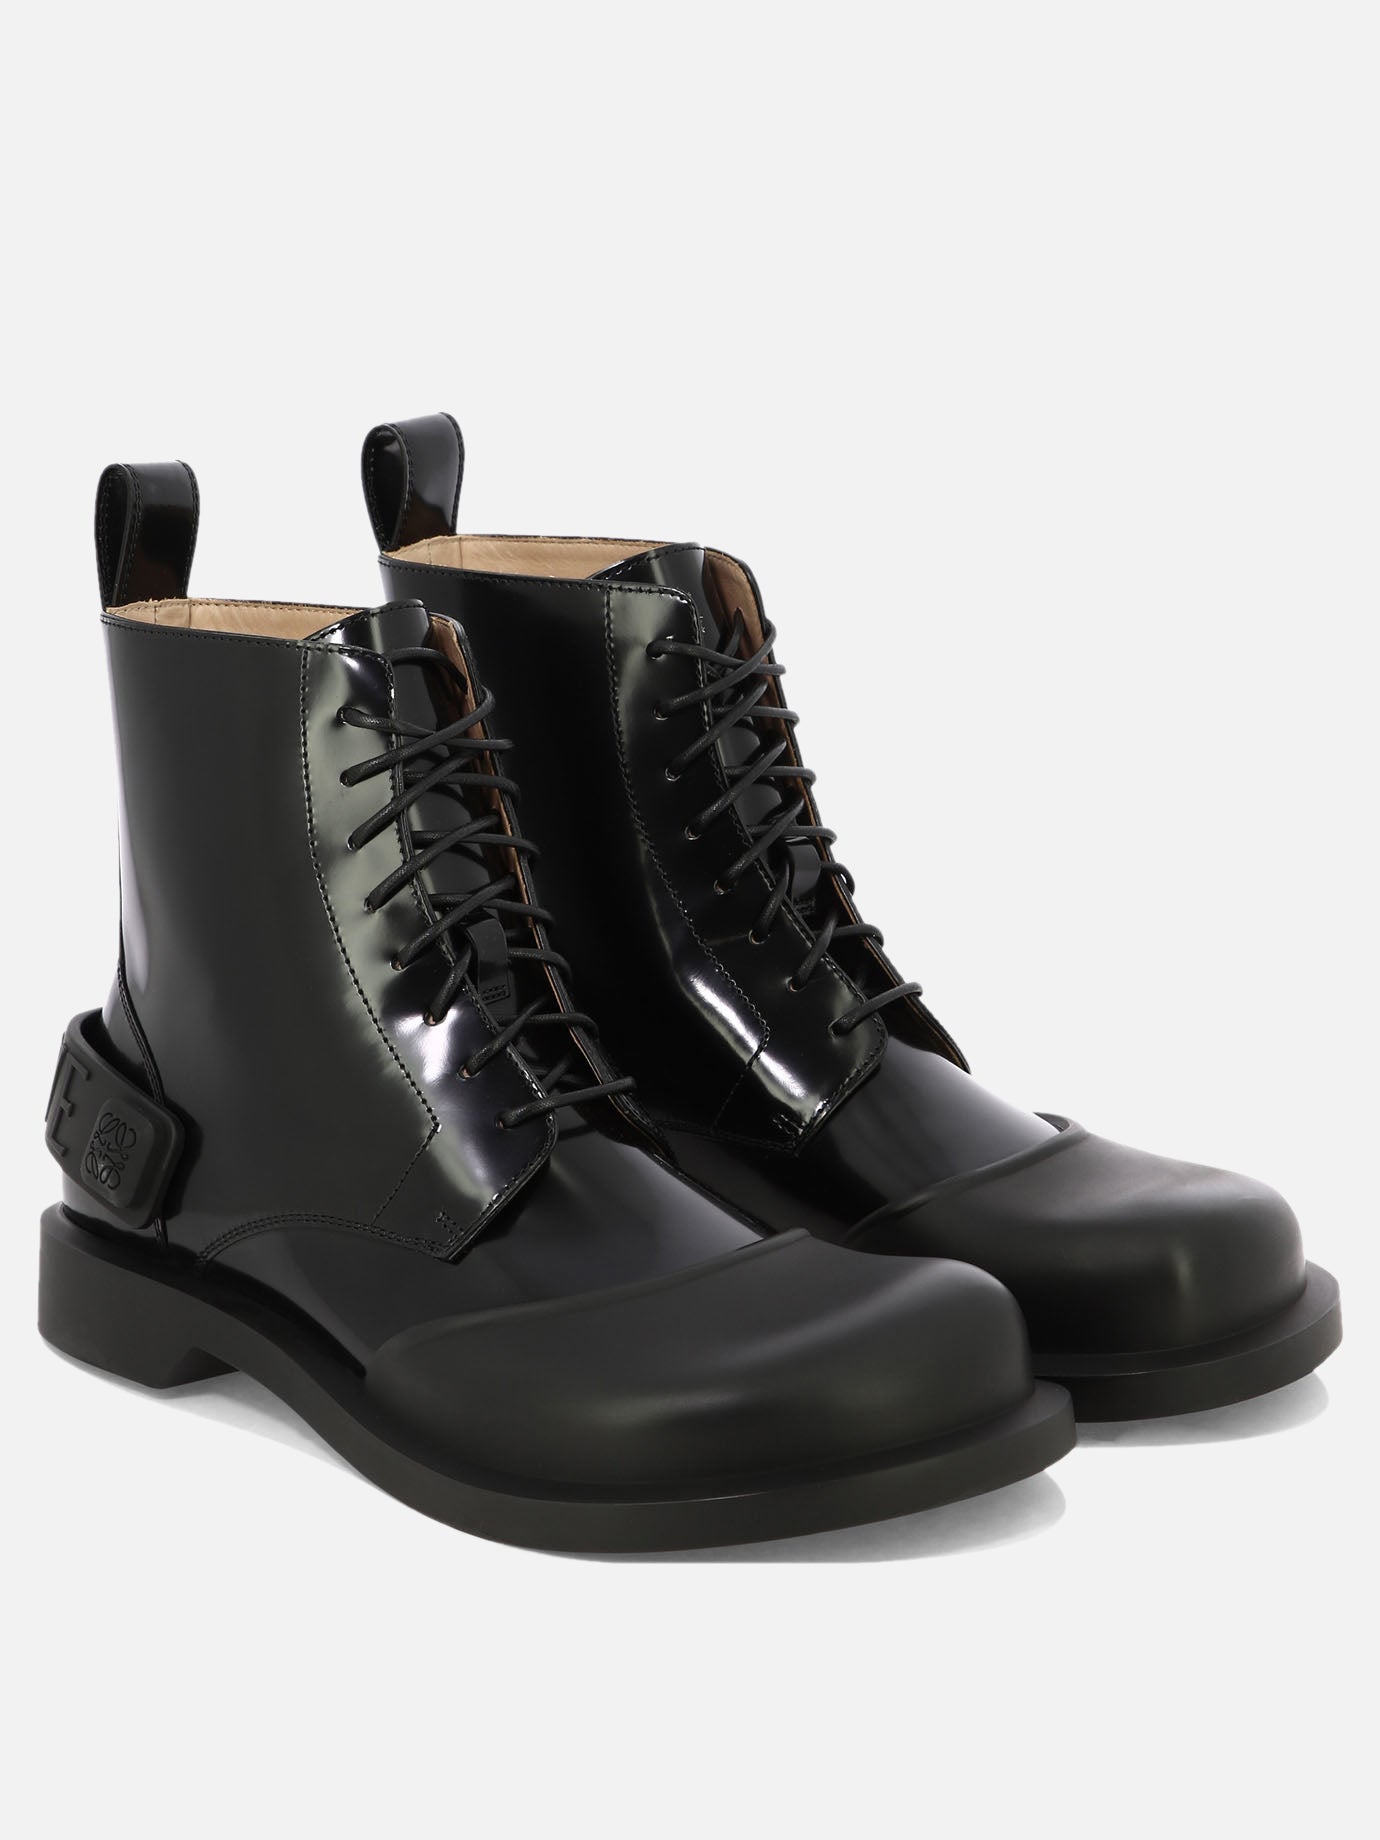 "Campo" lace-up boots